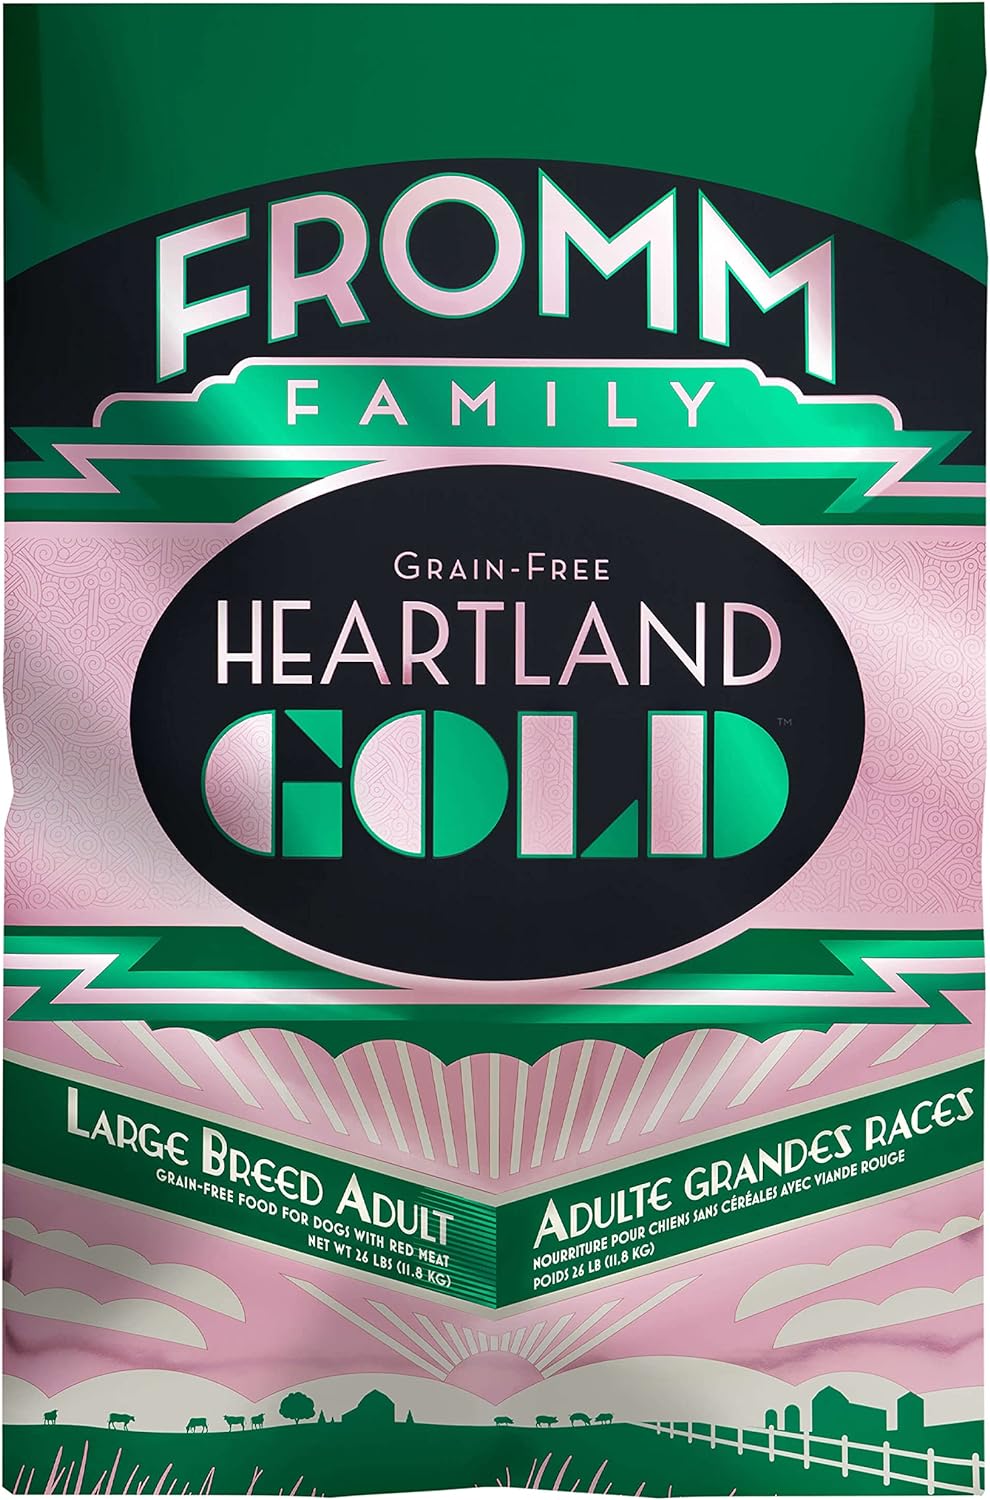 Fromm Heartland Gold Large Breed Adult Dry Dog Food – Gallery Image 1